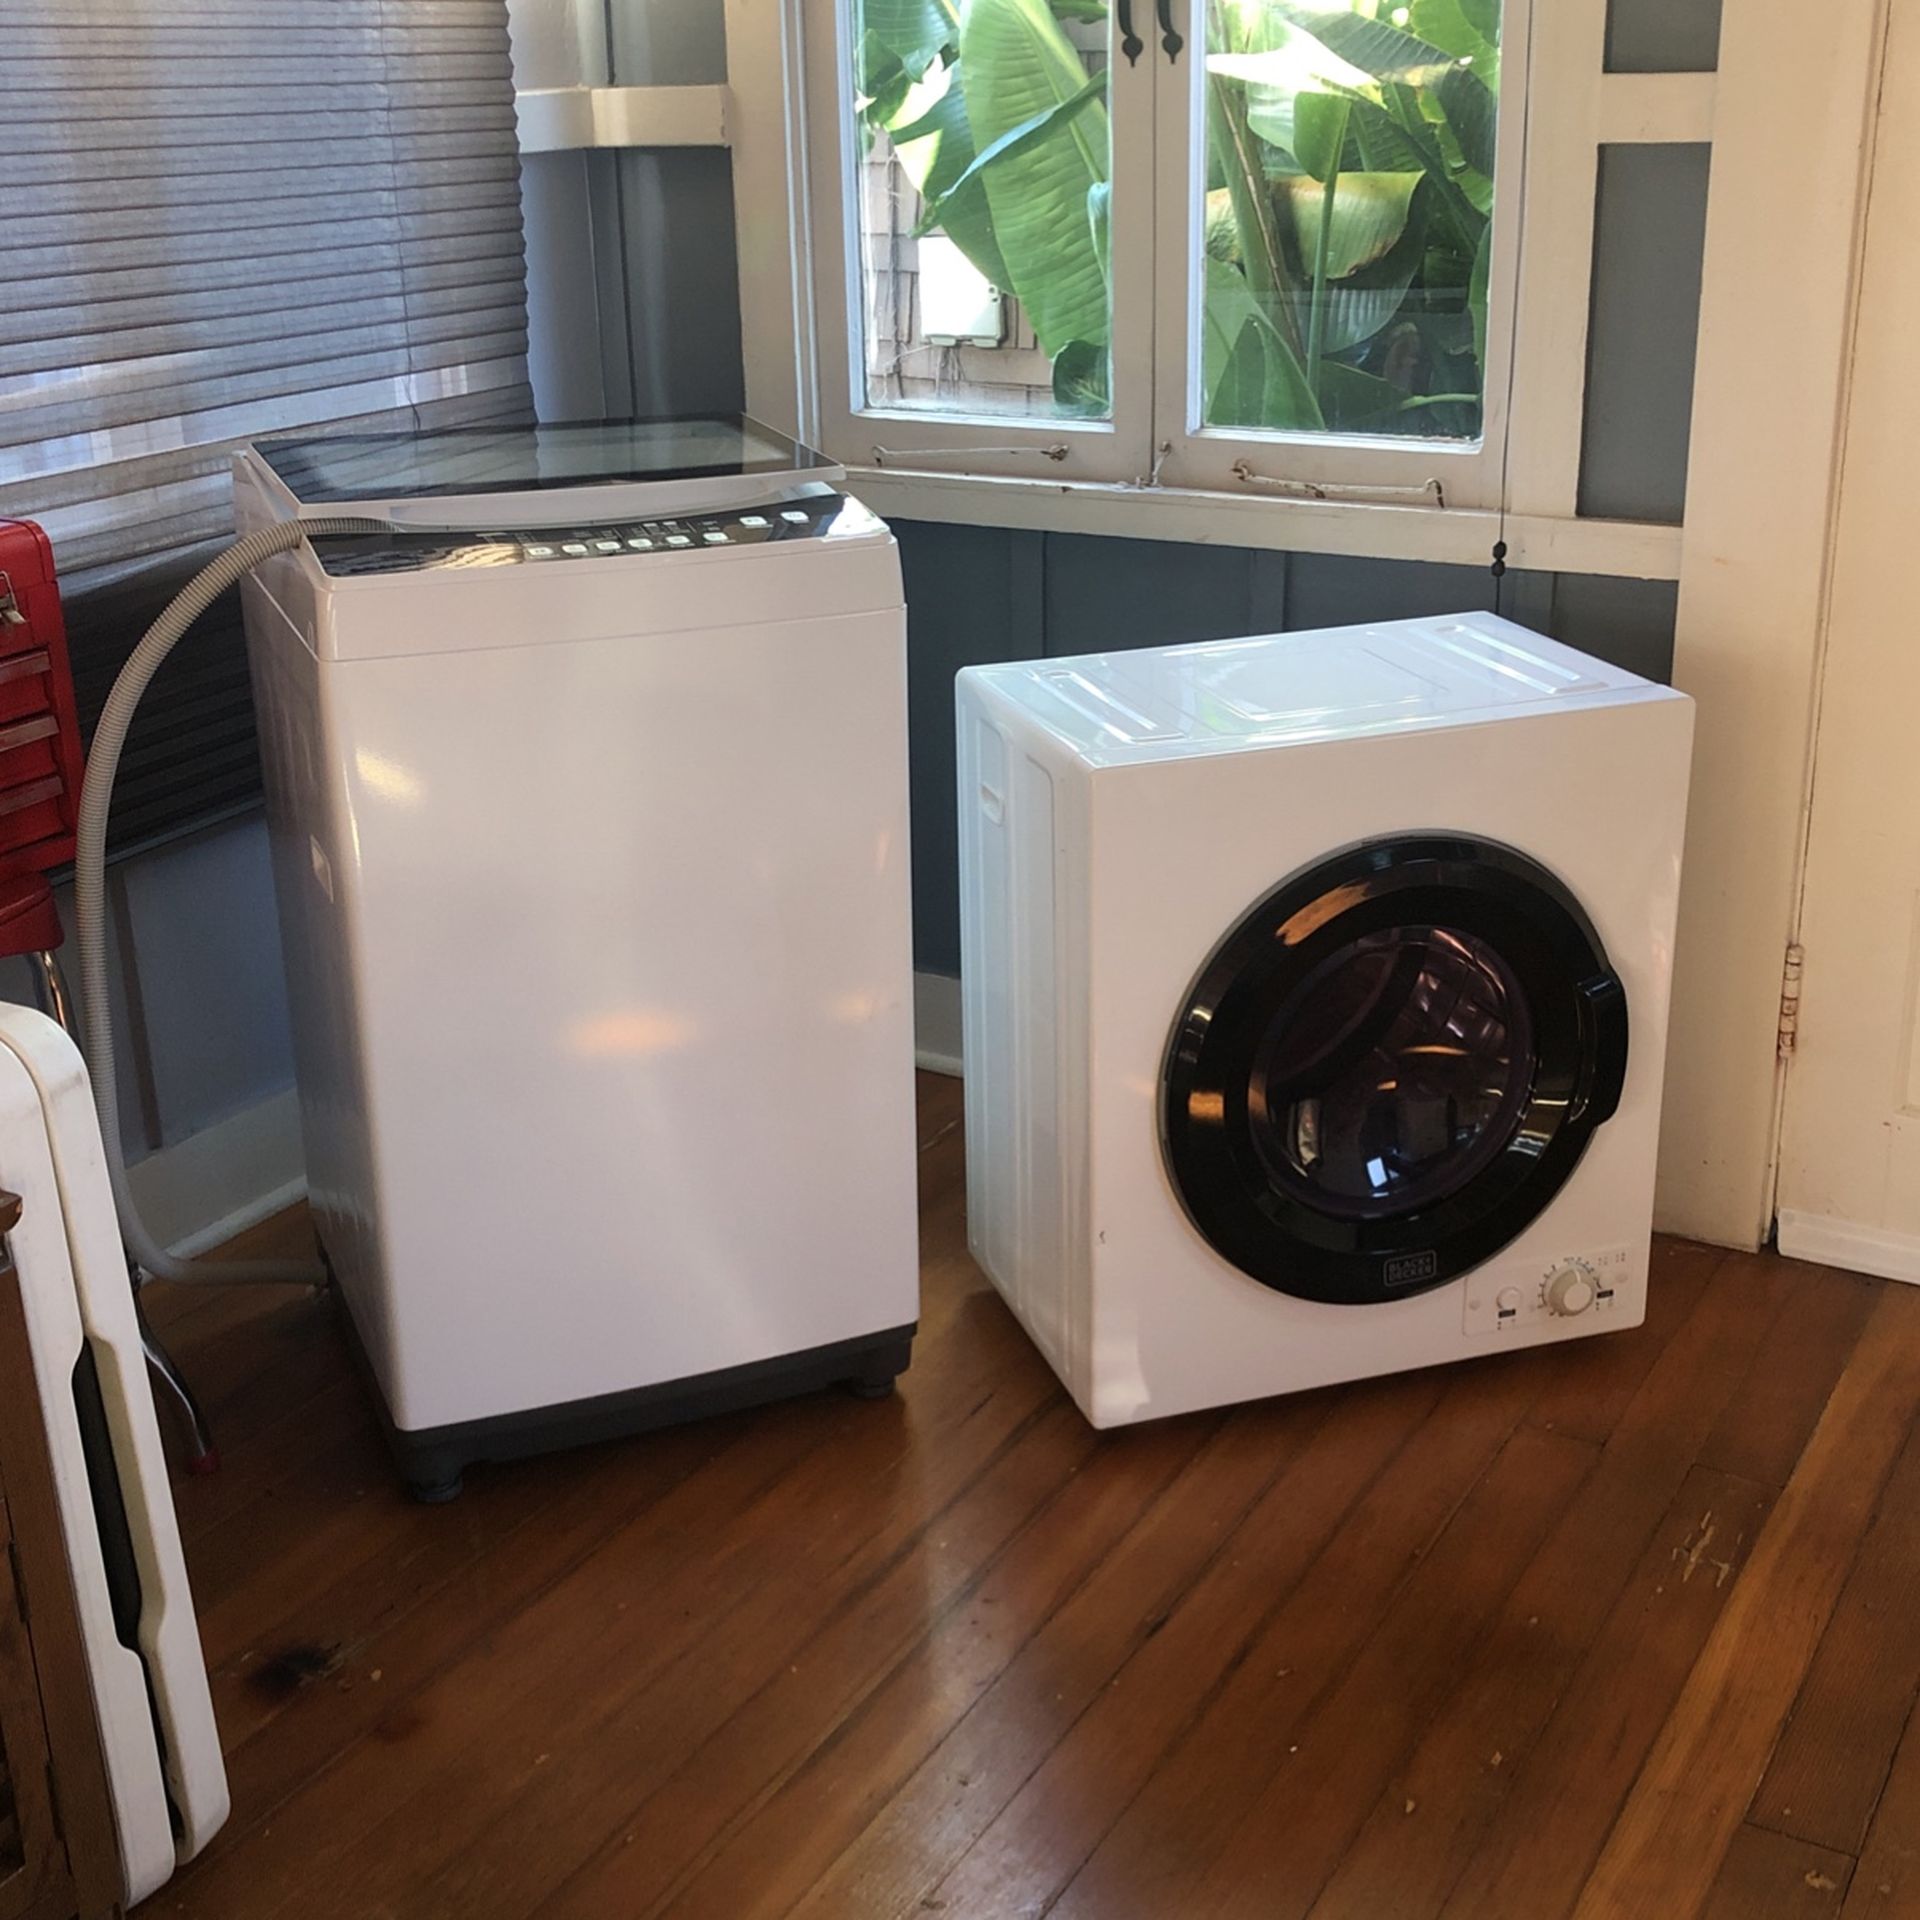 Apartment Sized Washer and Dryer